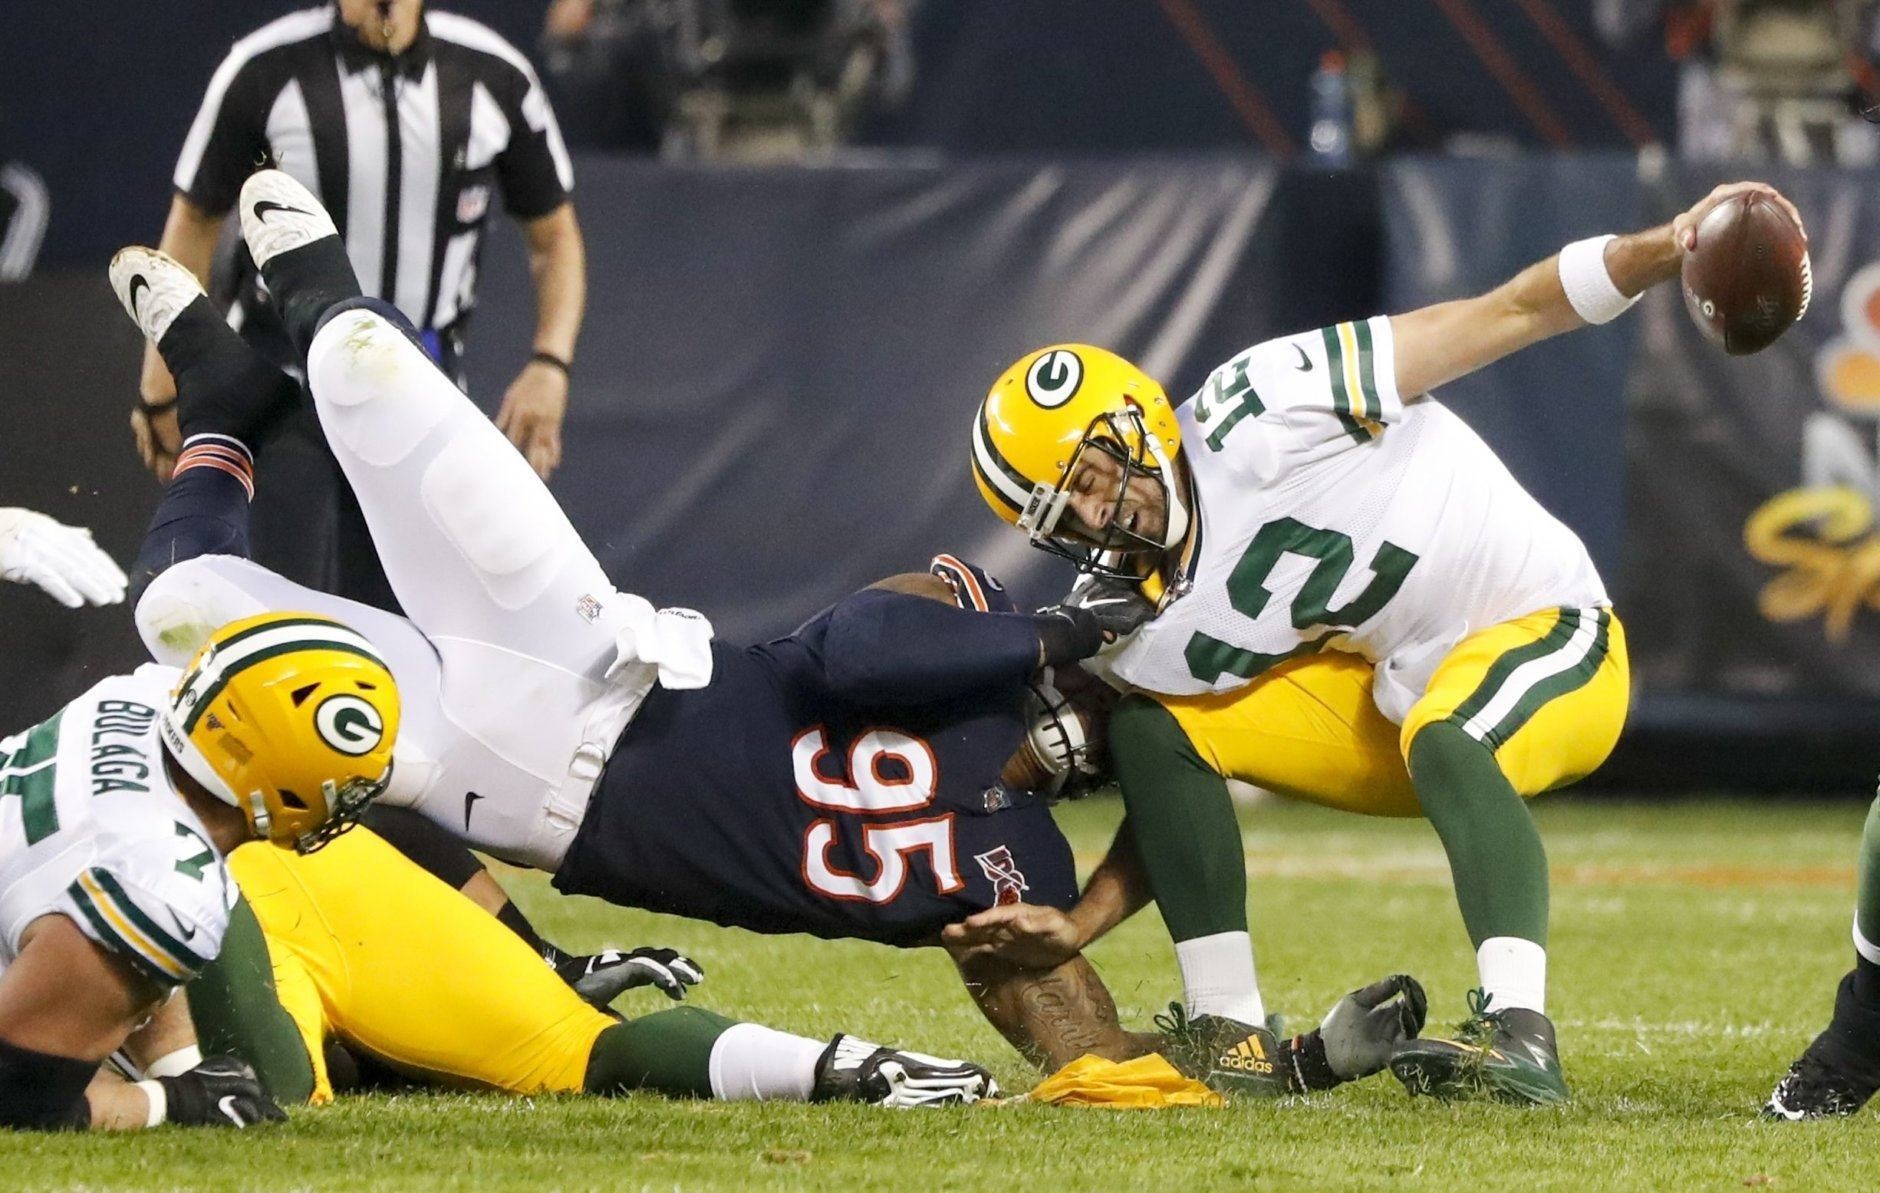 Bears’ Roy Robertson-Harris sacks quarterback Aaron Rodgers during the first half of the first NFL game of the year.